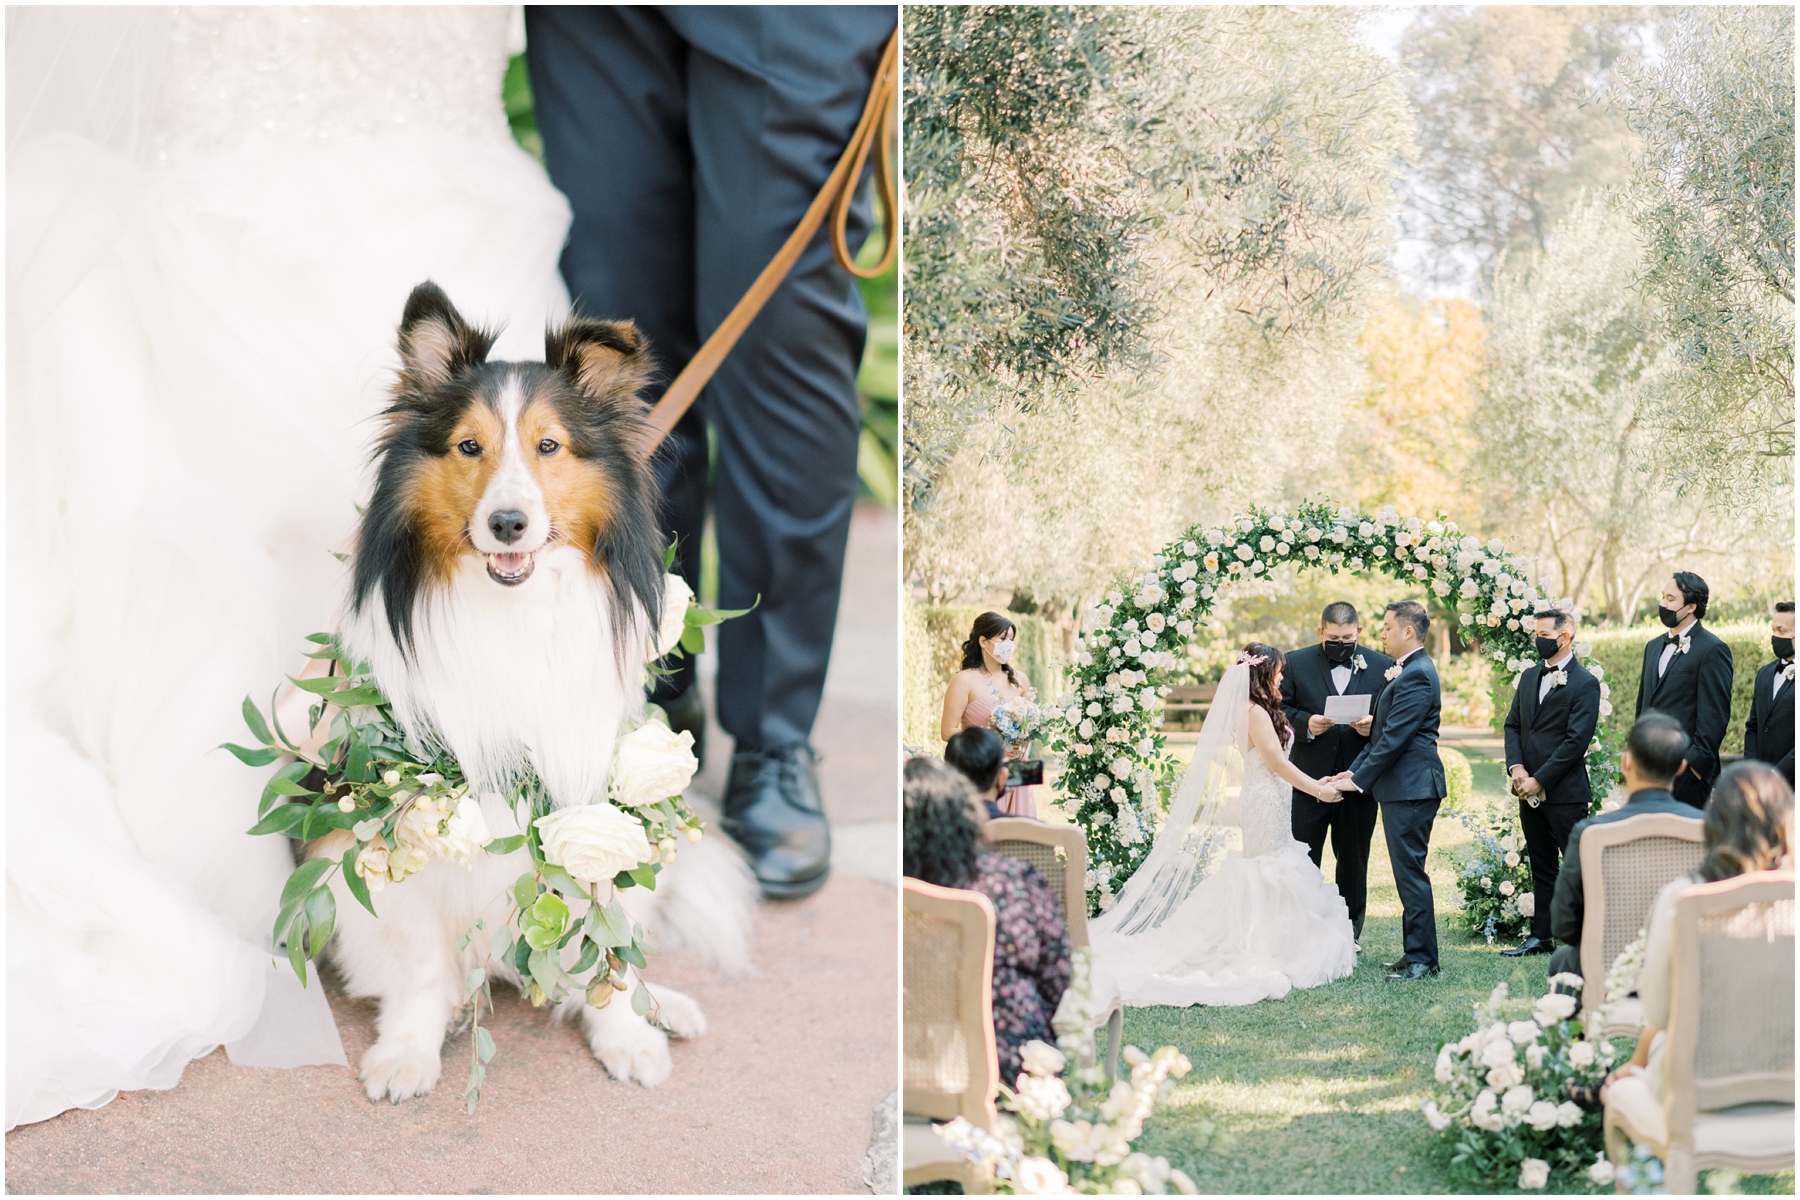 allied arts guild wedding with cute dog